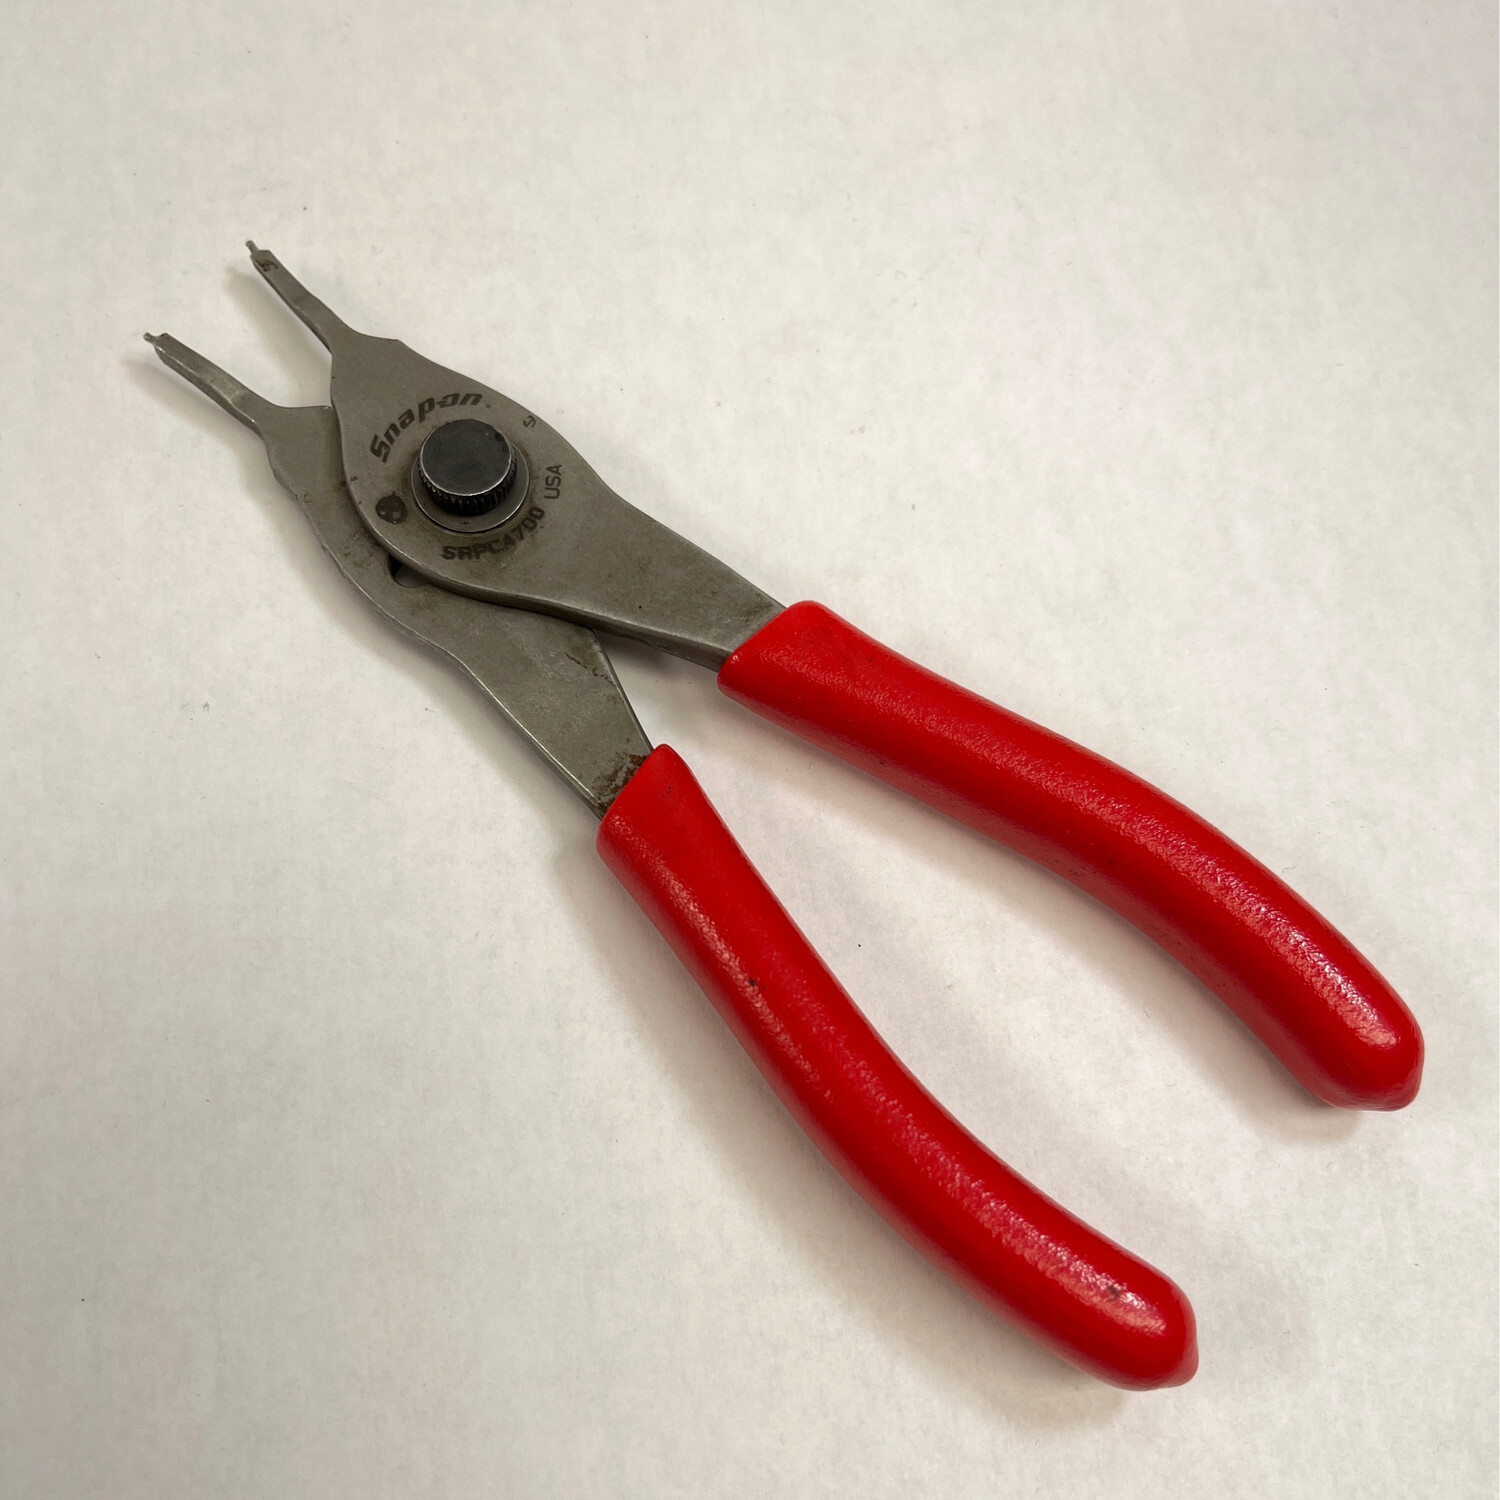 Snap On Snap Ring Pliers, SRPC4700